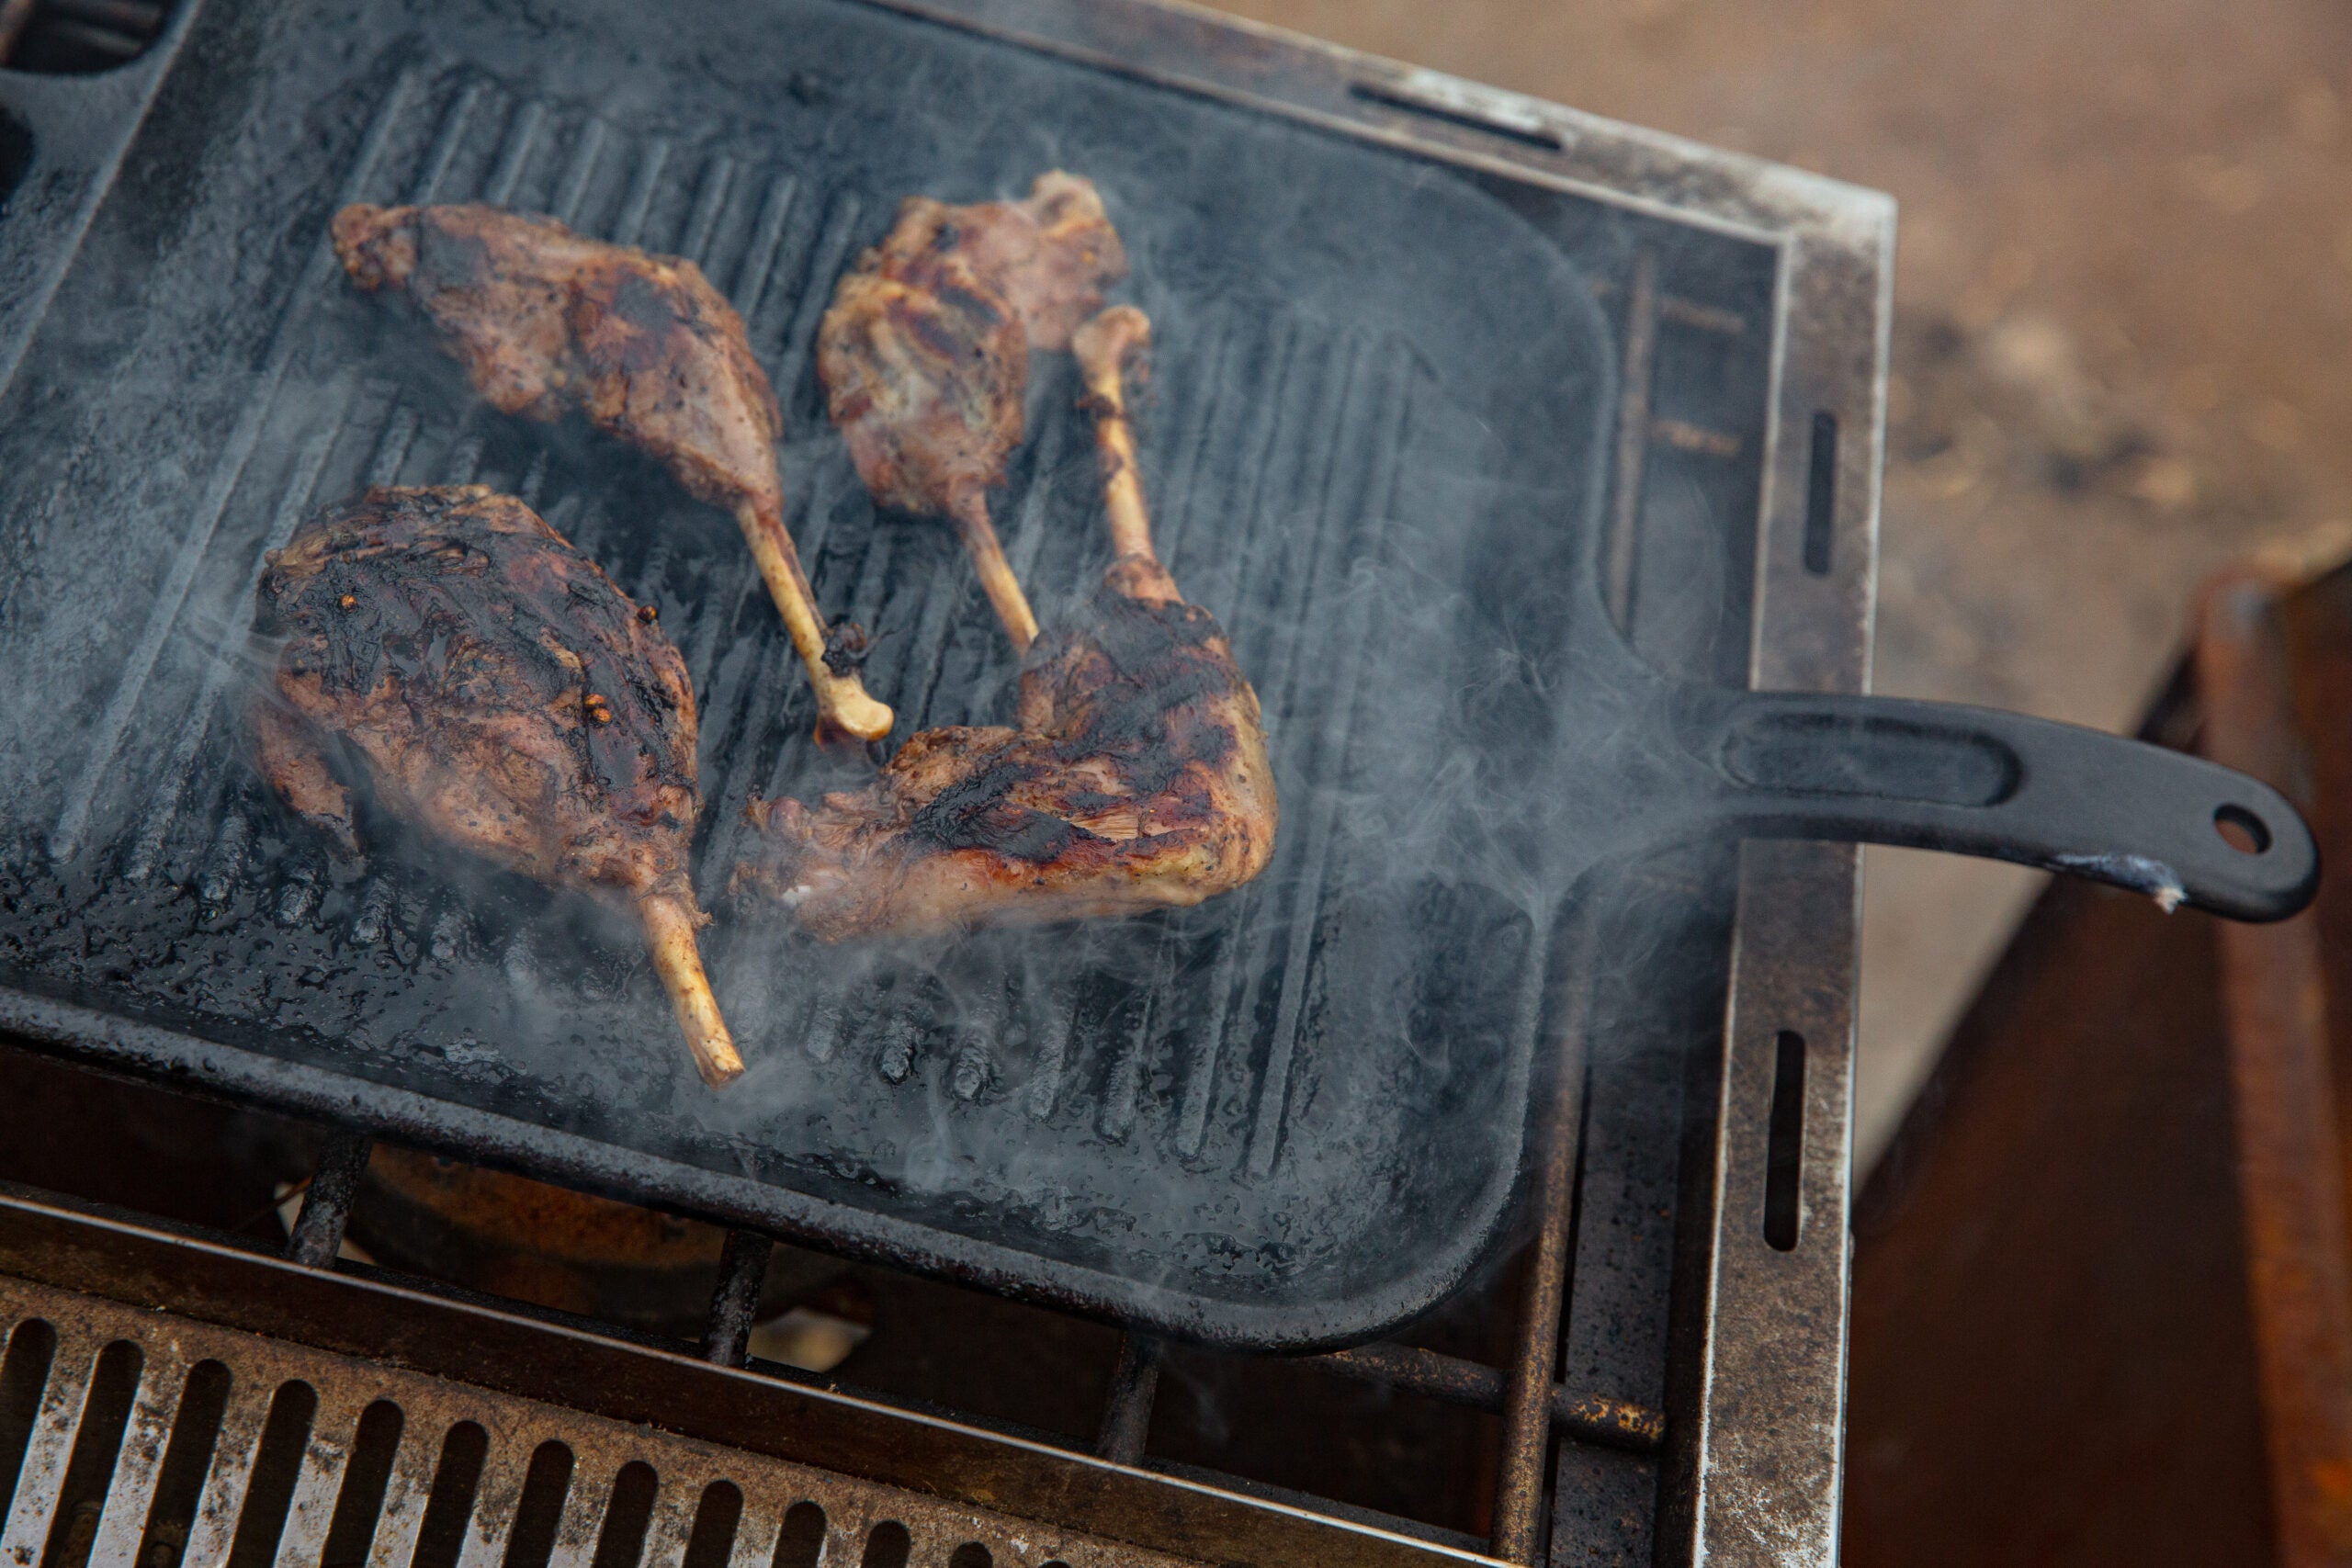 Goose legs cooking on a cast iron grill pan